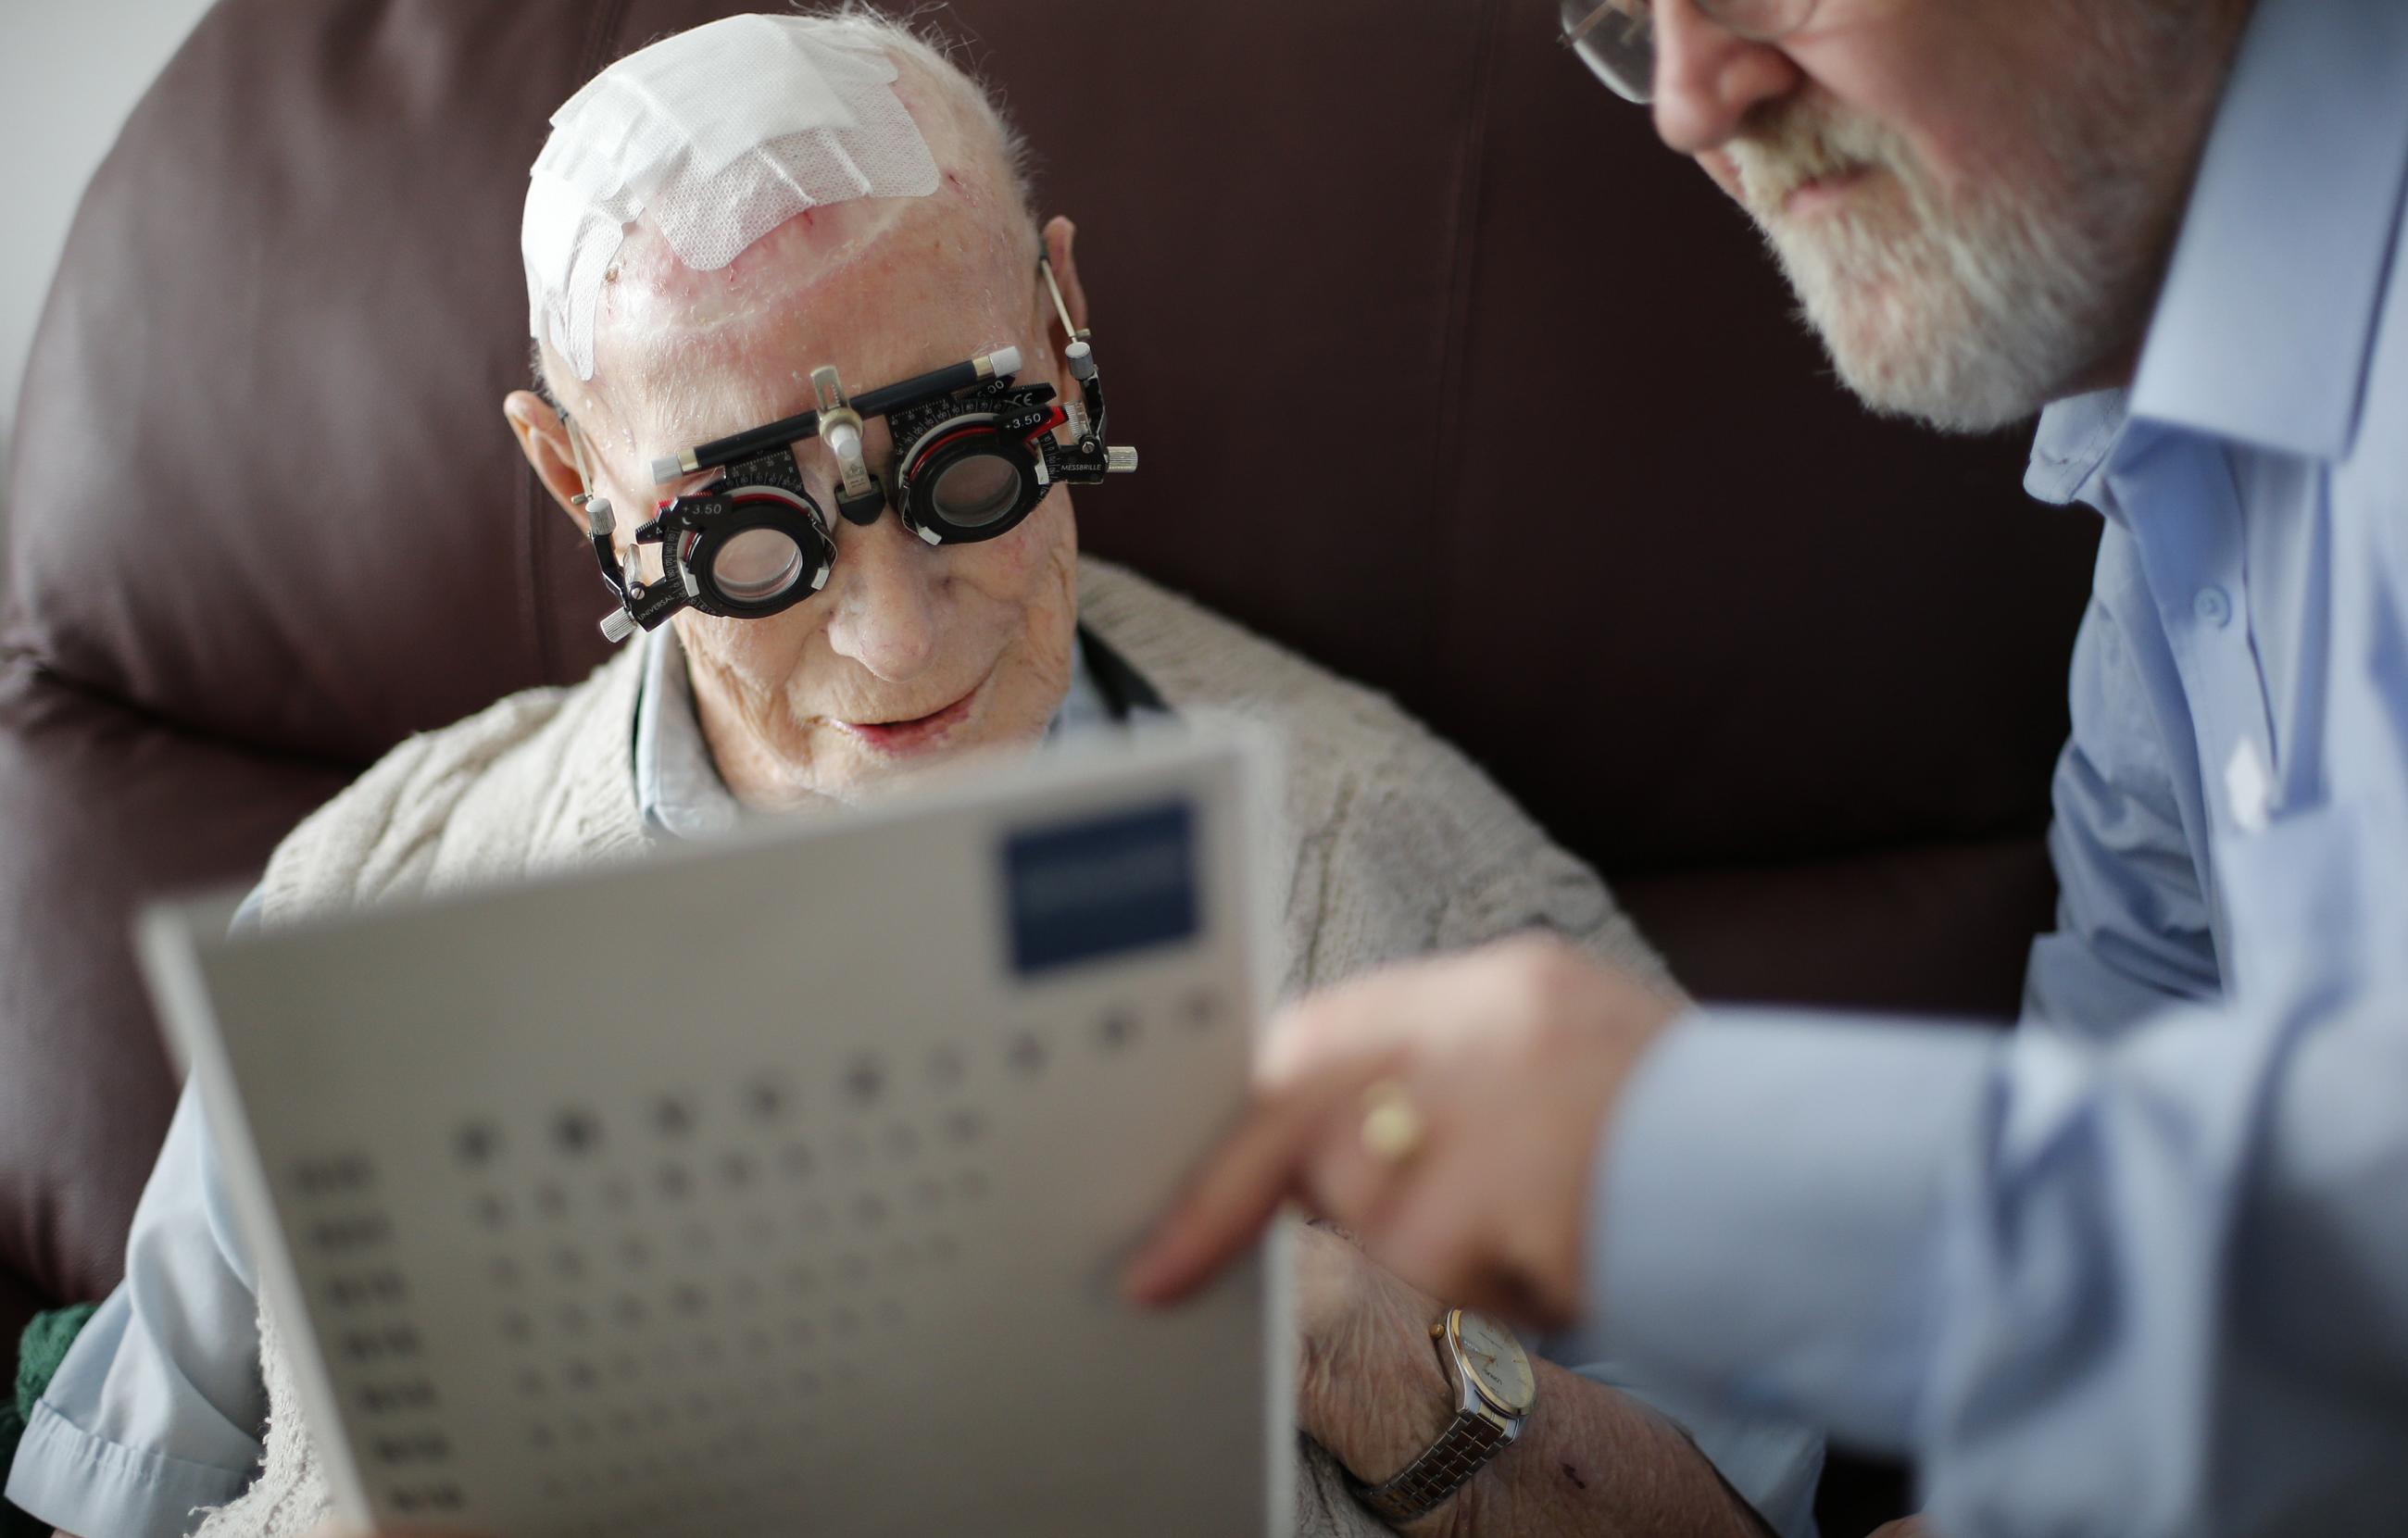 Resident Ernie Mayes, 89, has his eyes checked by Optometrist in his flat at the Colbrooke House care facility run by a private company working on behalf of the local government and housing association in southeast London February 13, 2015.